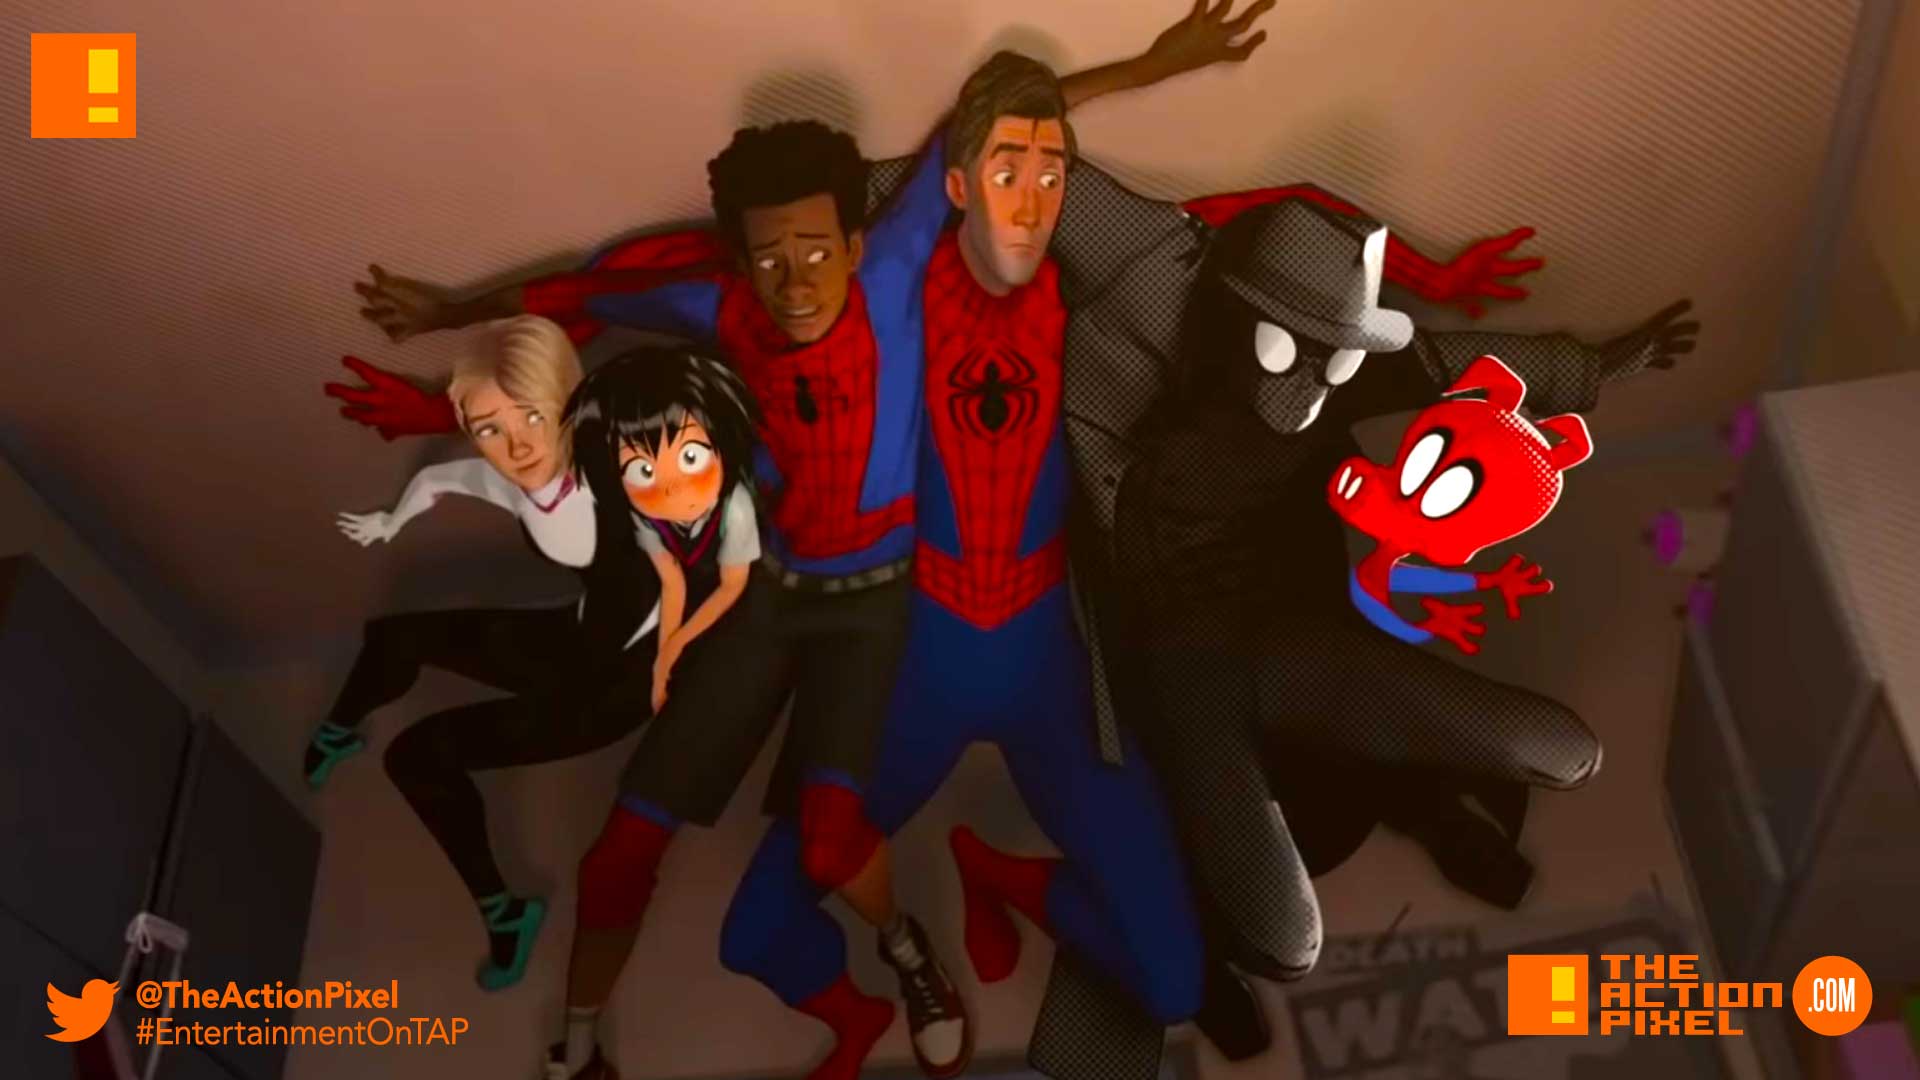 miles morales, spiderman, spider man, spider-man, sony, marvel, marvel comics, animated feature, animation, the action pixel, entertainment on tap,sony animation, marvel,into the spiderverse, spider-man: into the spider-verse,gwen stacey, poster, trailer #2 ,